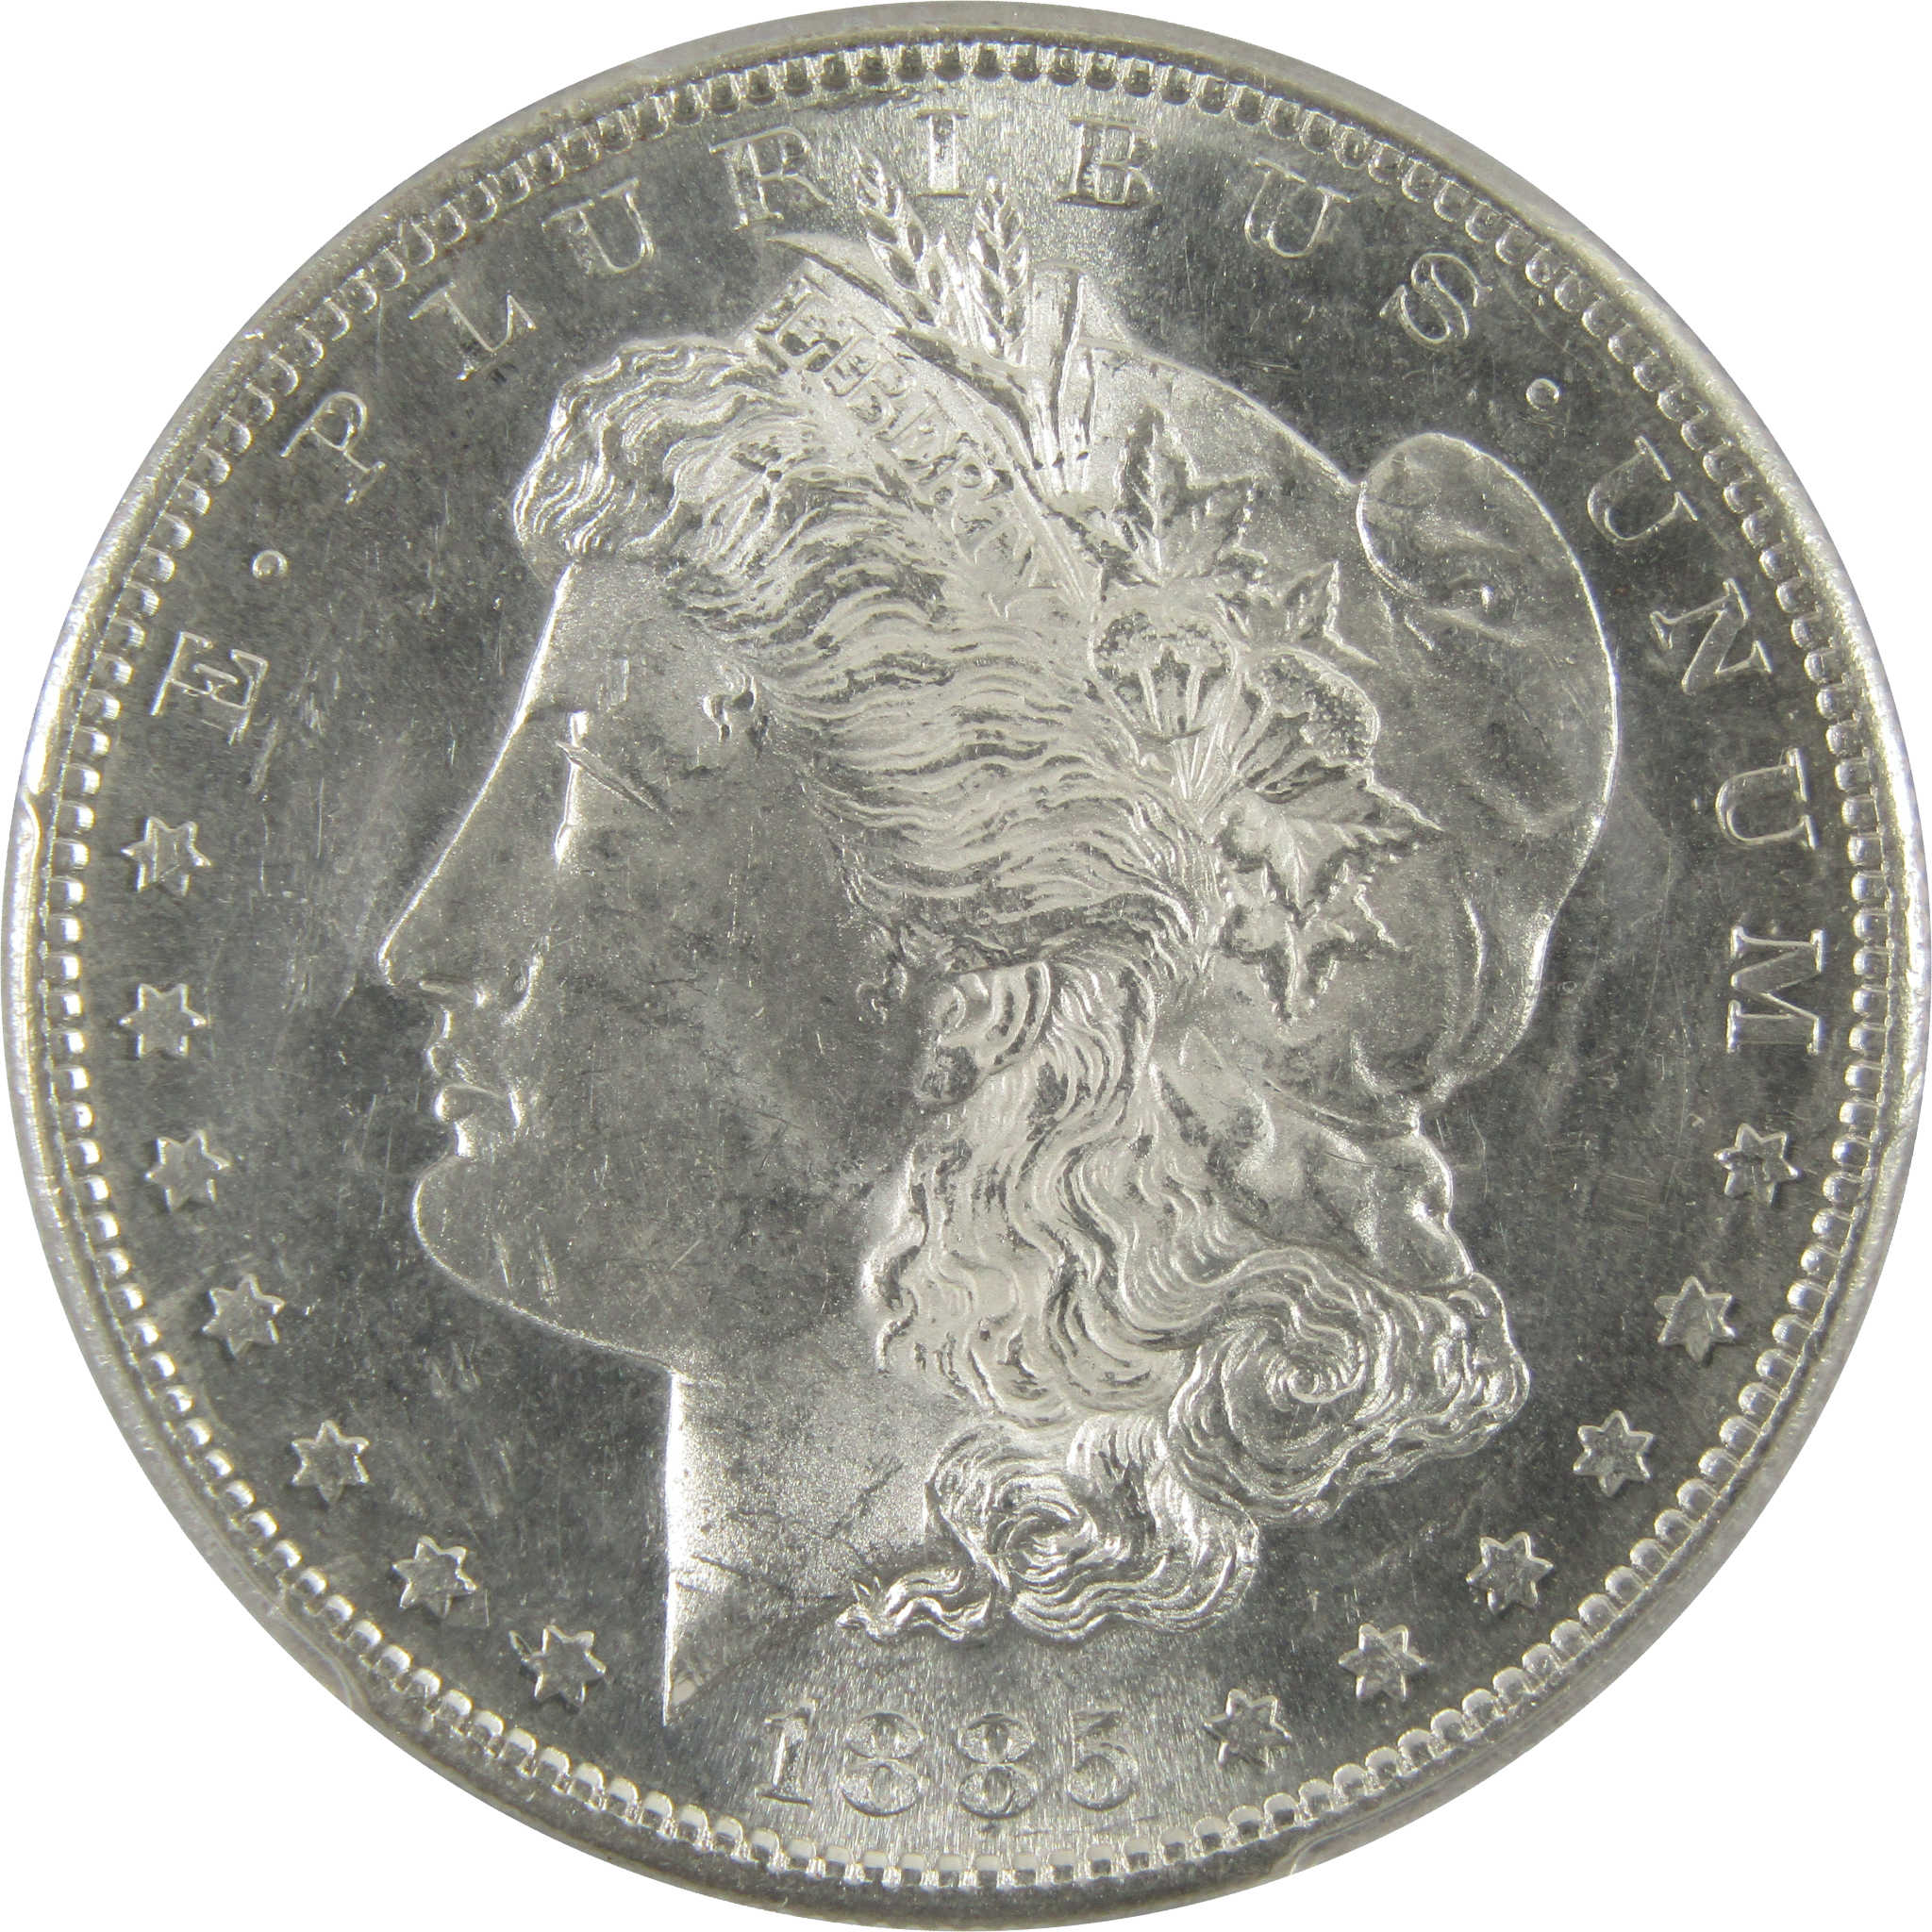 1885 S Morgan Dollar MS 62 PCGS 90% Silver $1 Uncirculated SKU:I8066 - Morgan coin - Morgan silver dollar - Morgan silver dollar for sale - Profile Coins &amp; Collectibles